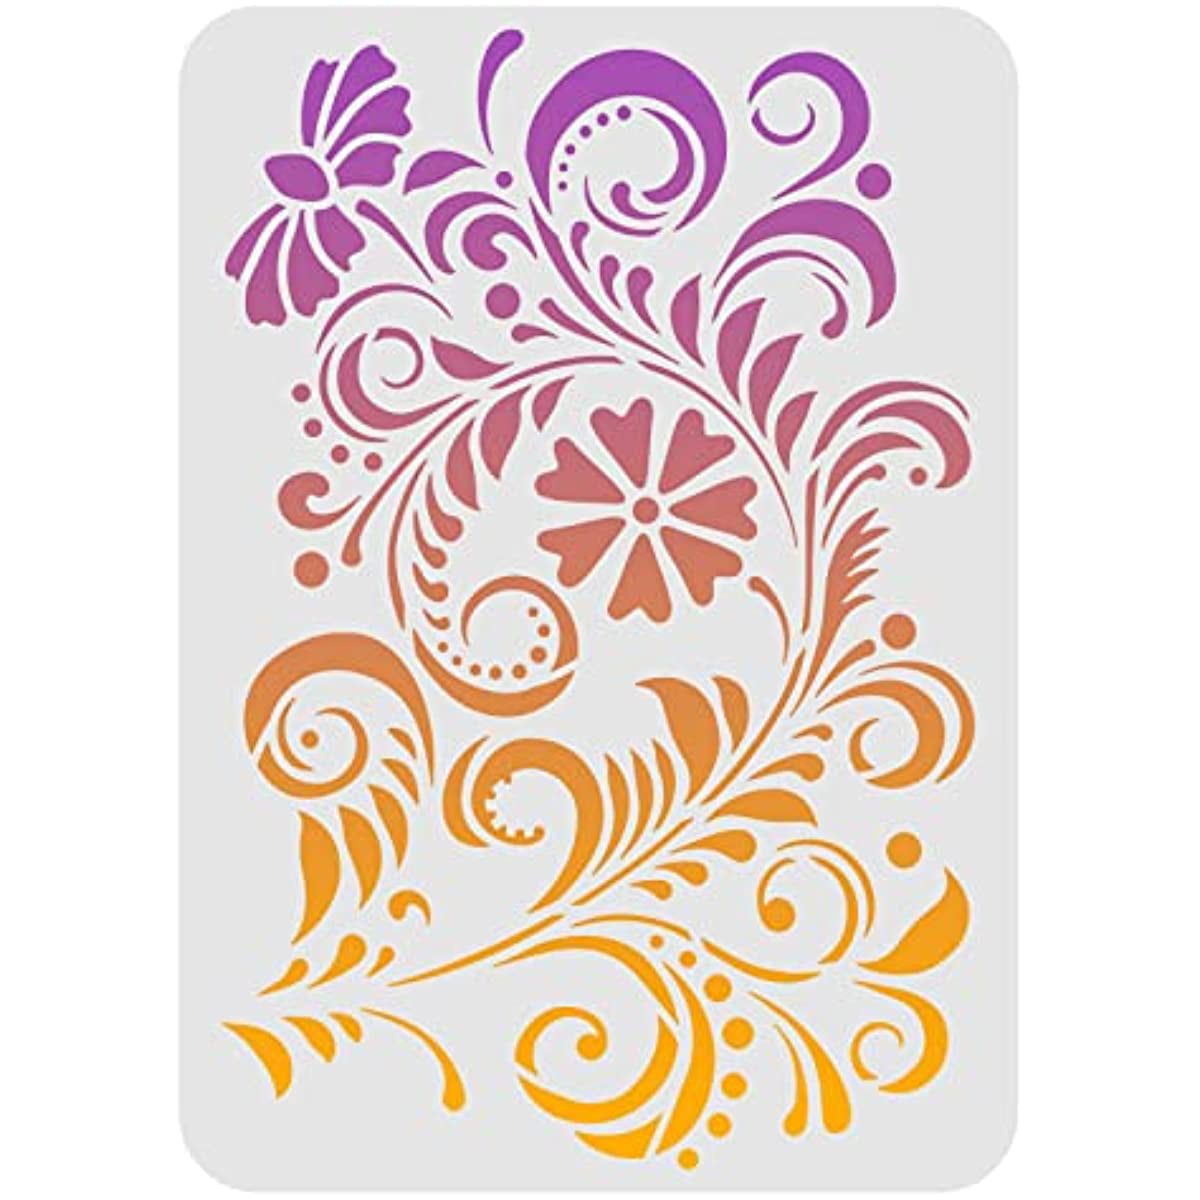 CrafTreat Floral Border Stencils for Painting on Wood, Canvas, Paper,  Fabric, Floor, Wall and Tile - Border12 and Border13-2 Pcs - 3x12 Inches  Each 